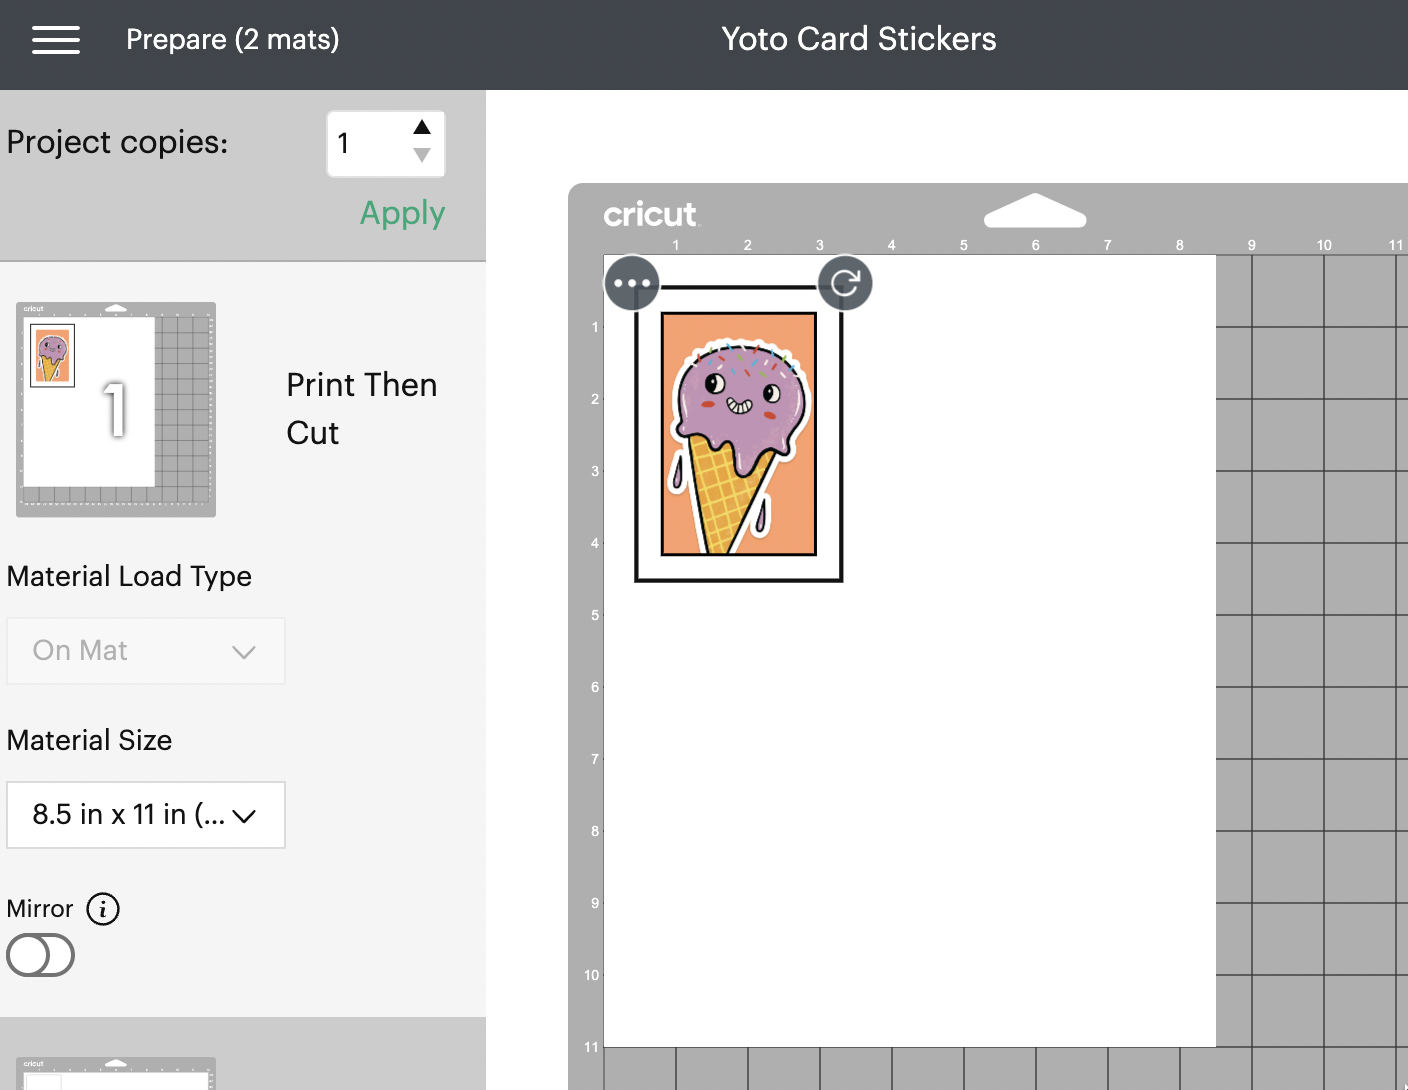 How to Make Your Own Yoto Cards